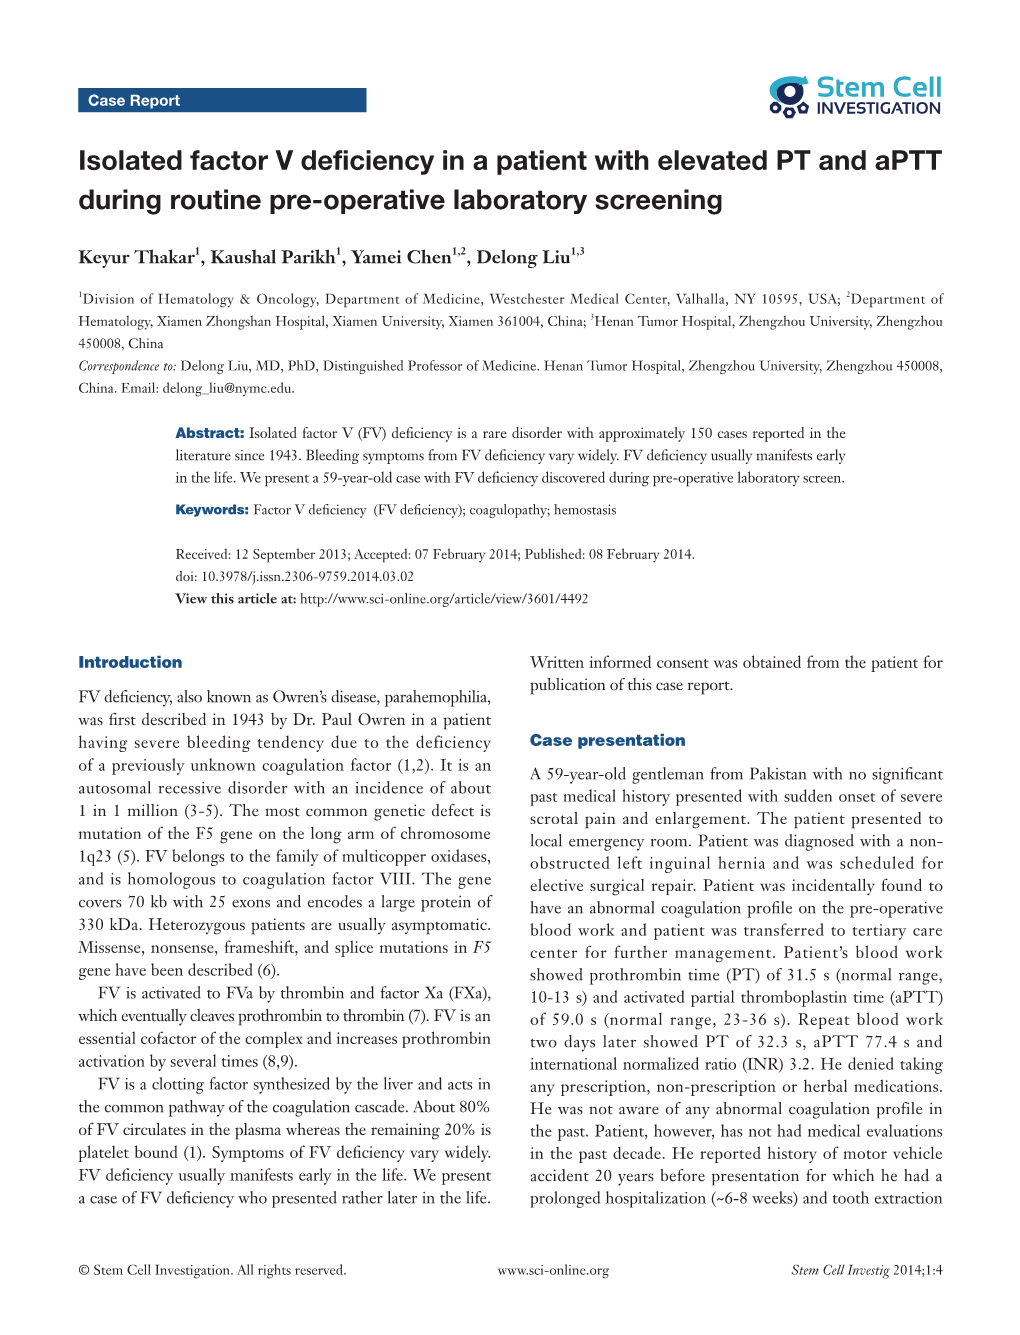 Isolated Factor V Deficiency in a Patient with Elevated PT and Aptt During Routine Pre-Operative Laboratory Screening